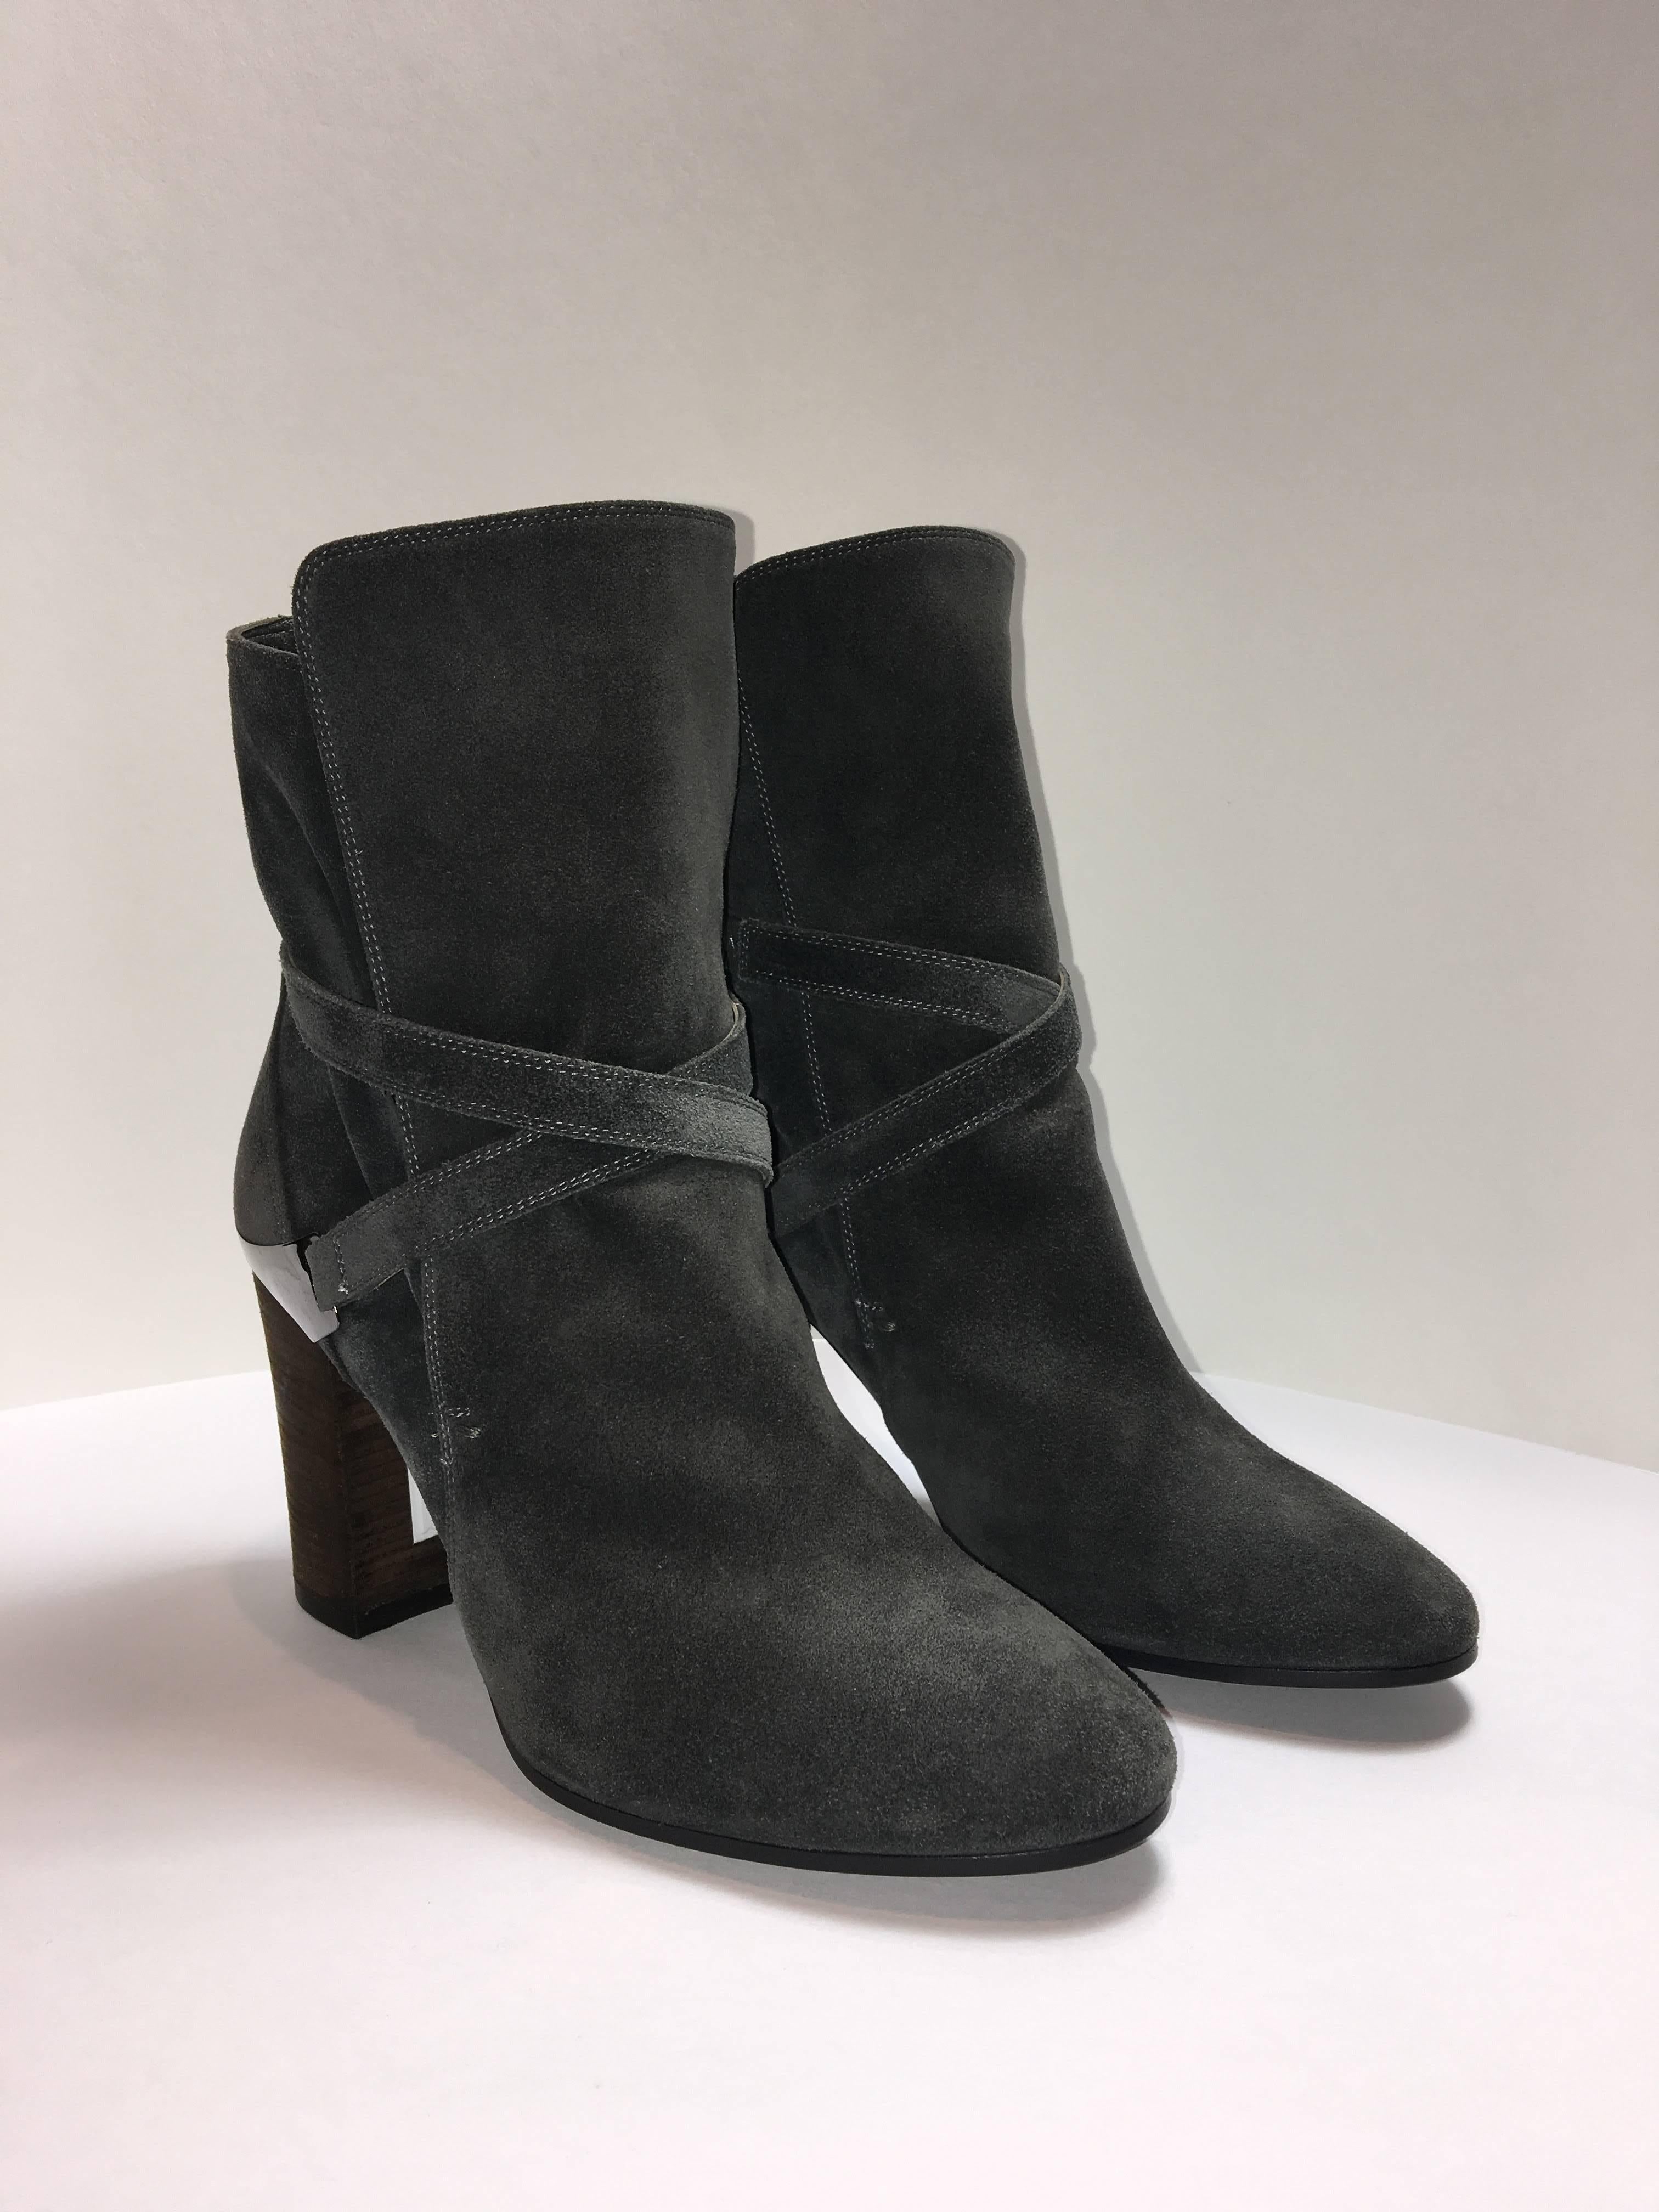 Very lightly worn Lanvin booties show little wear on their matieral and sole. Criss-cross detail wraps around ankle and synches at heel. Contrasting stitching along seams.